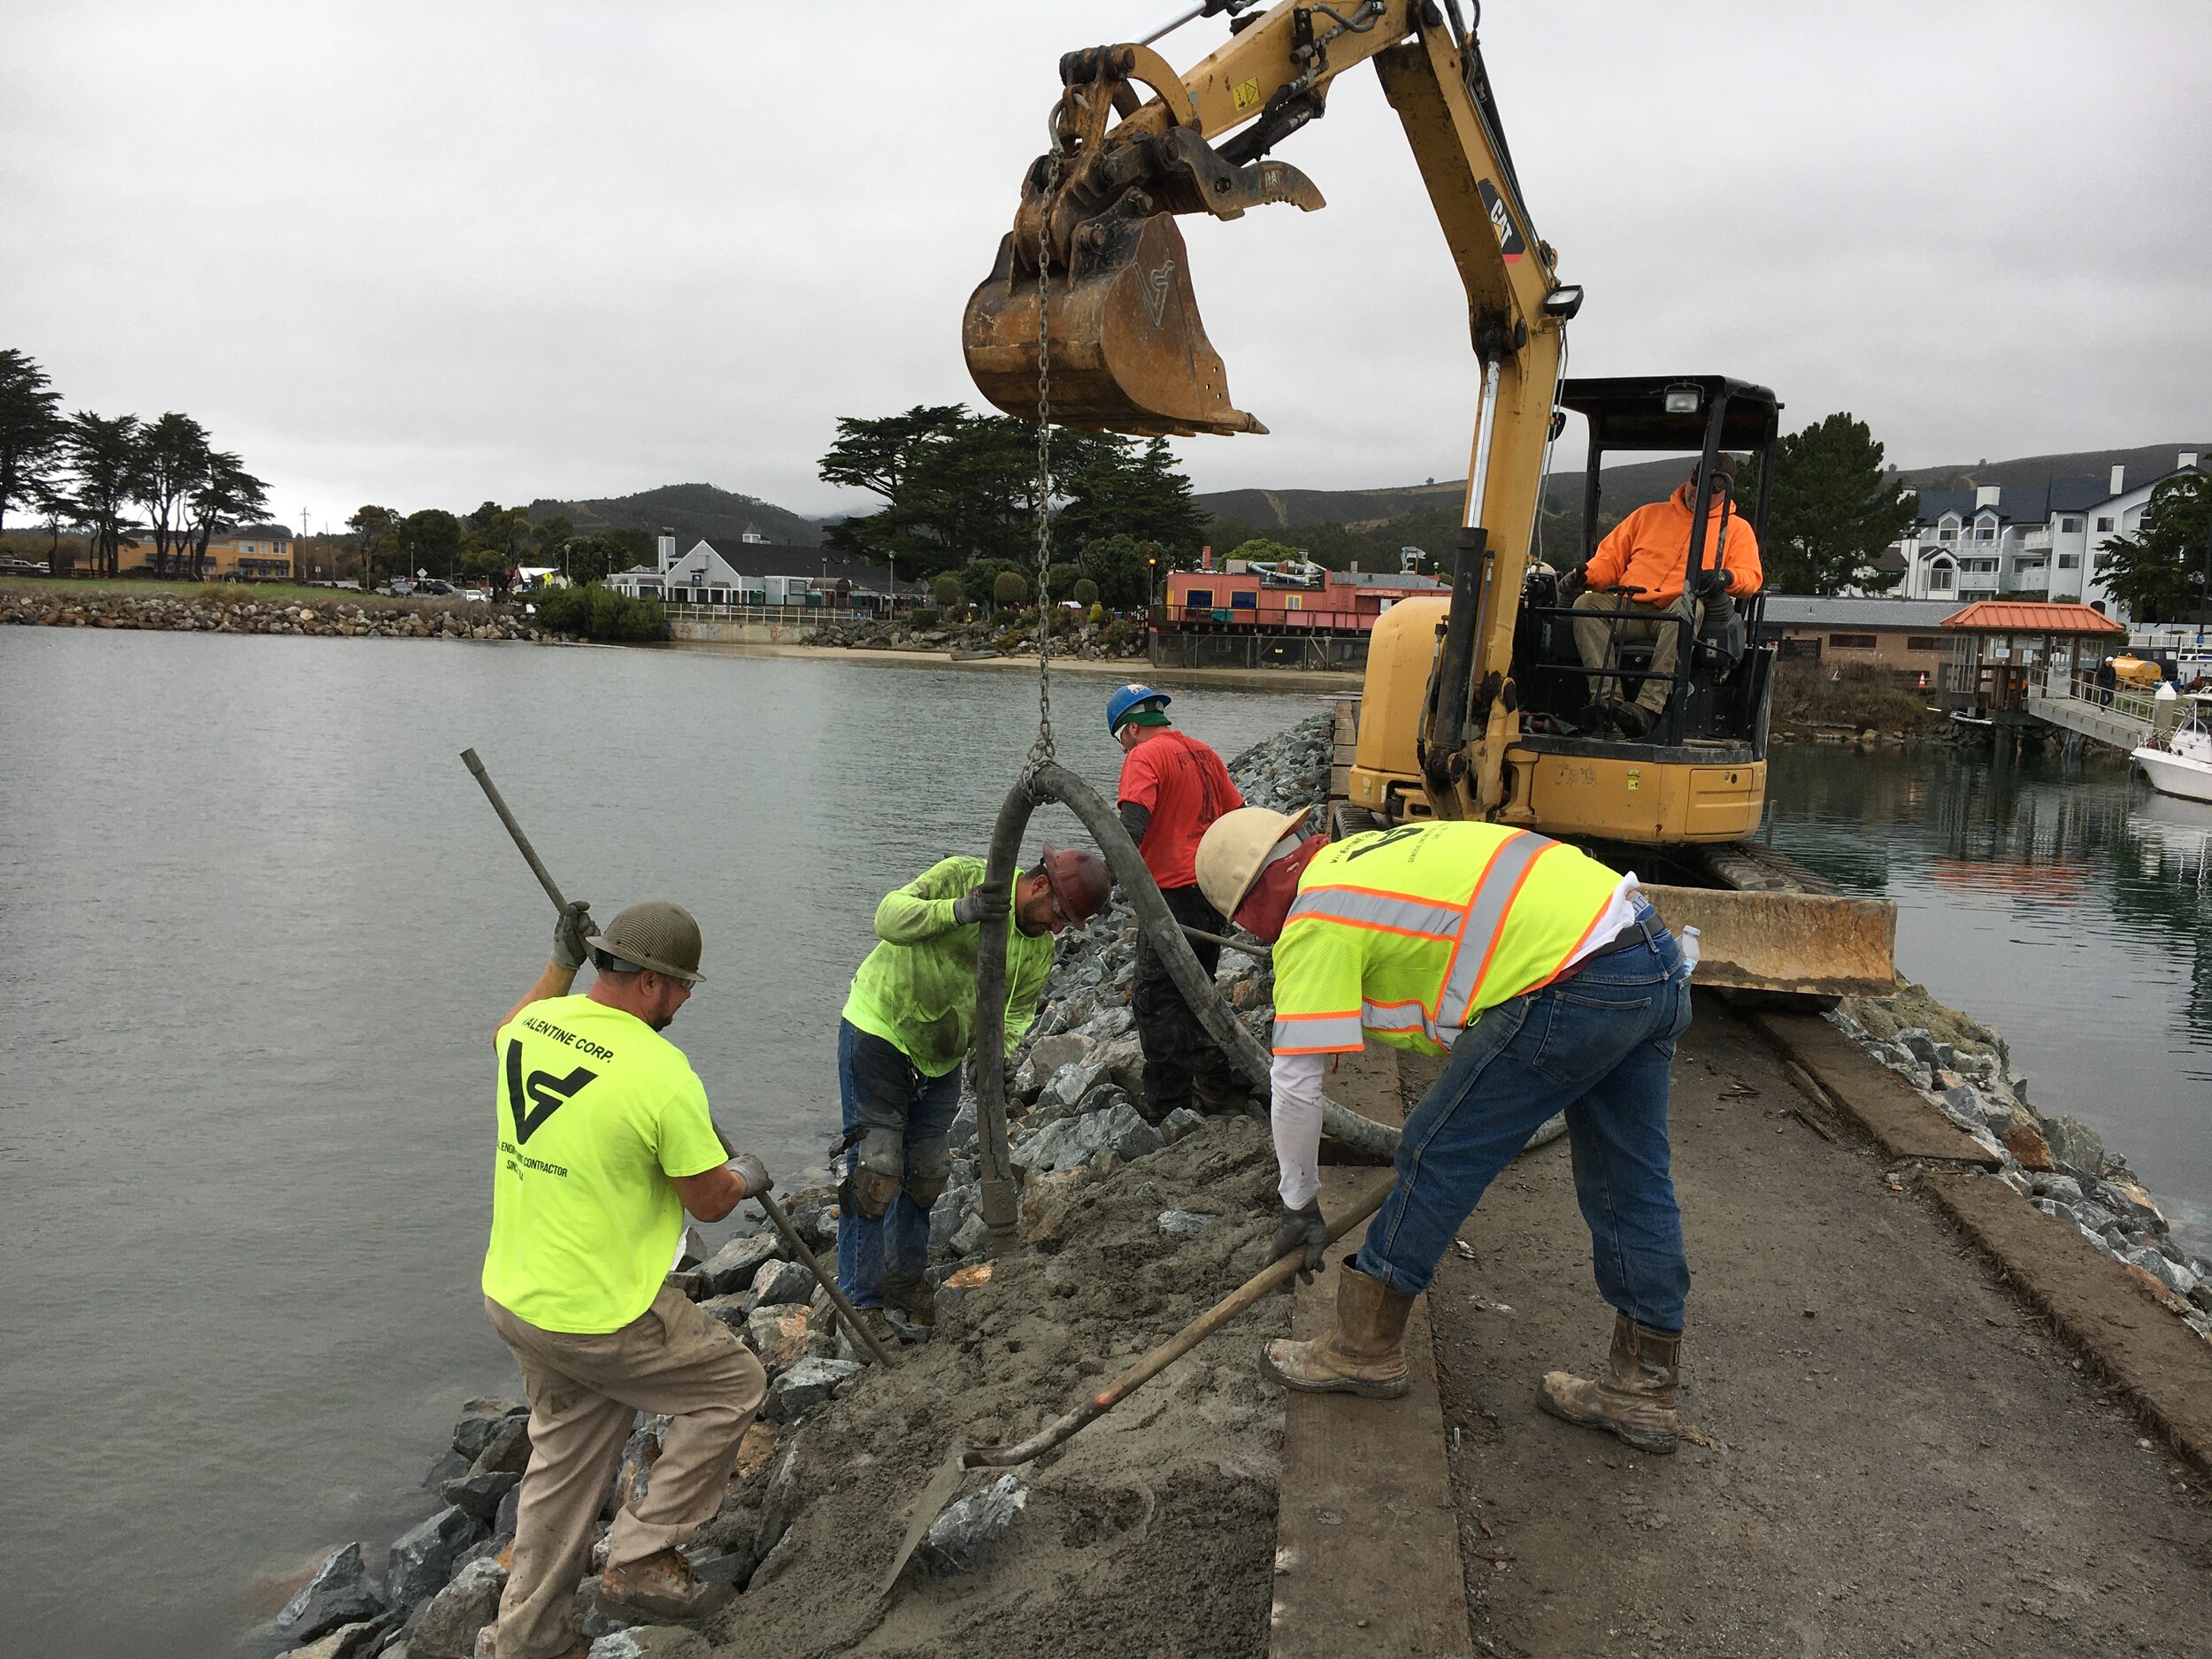   Welcome To Valentine Corporation   Project: Pillar Point Fishing Pier Rehabilitation  If It's Difficult Or Unusual, Call Us!   Contact Us  